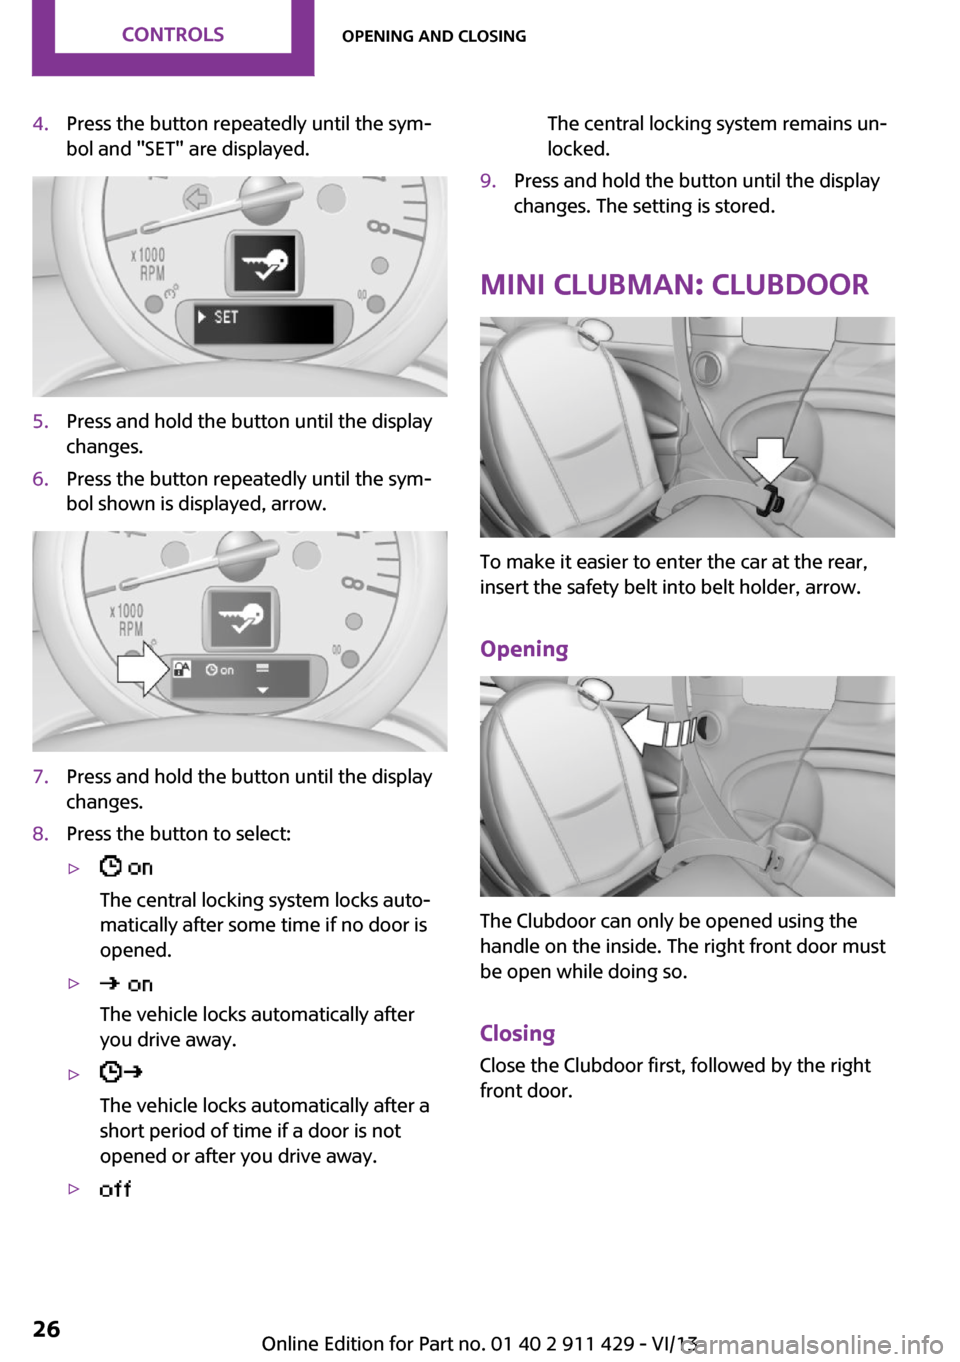 MINI Clubman 2014 Owners Guide 4.Press the button repeatedly until the sym‐
bol and "SET" are displayed.5.Press and hold the button until the display
changes.6.Press the button repeatedly until the sym‐
bol shown is displayed, 